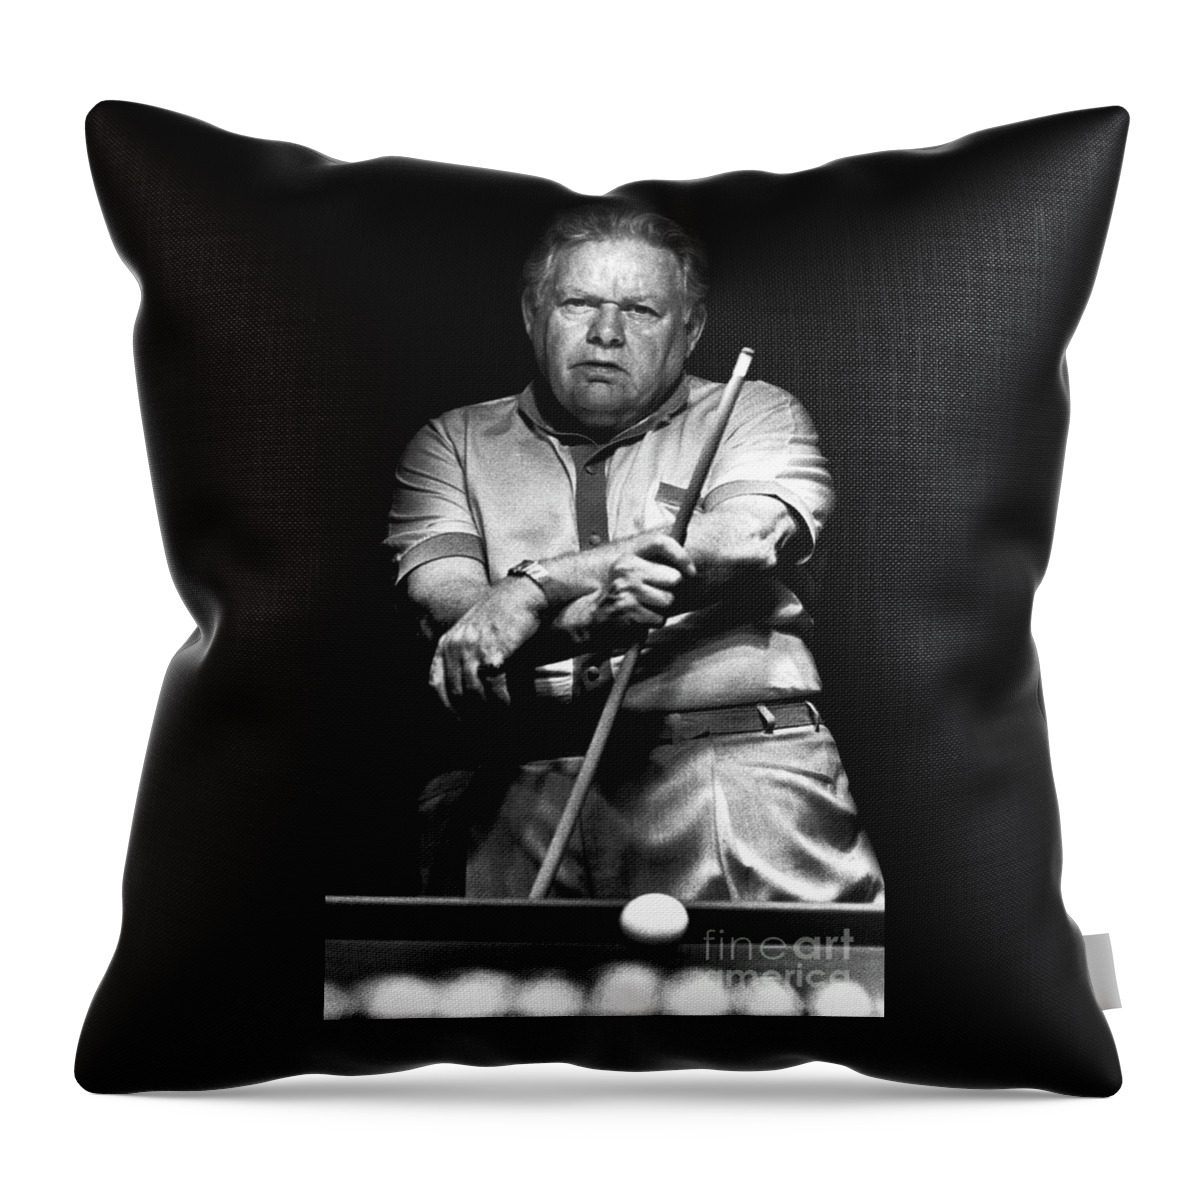 Pool Hustler Throw Pillow featuring the photograph Minnesota Fats by Doc Braham